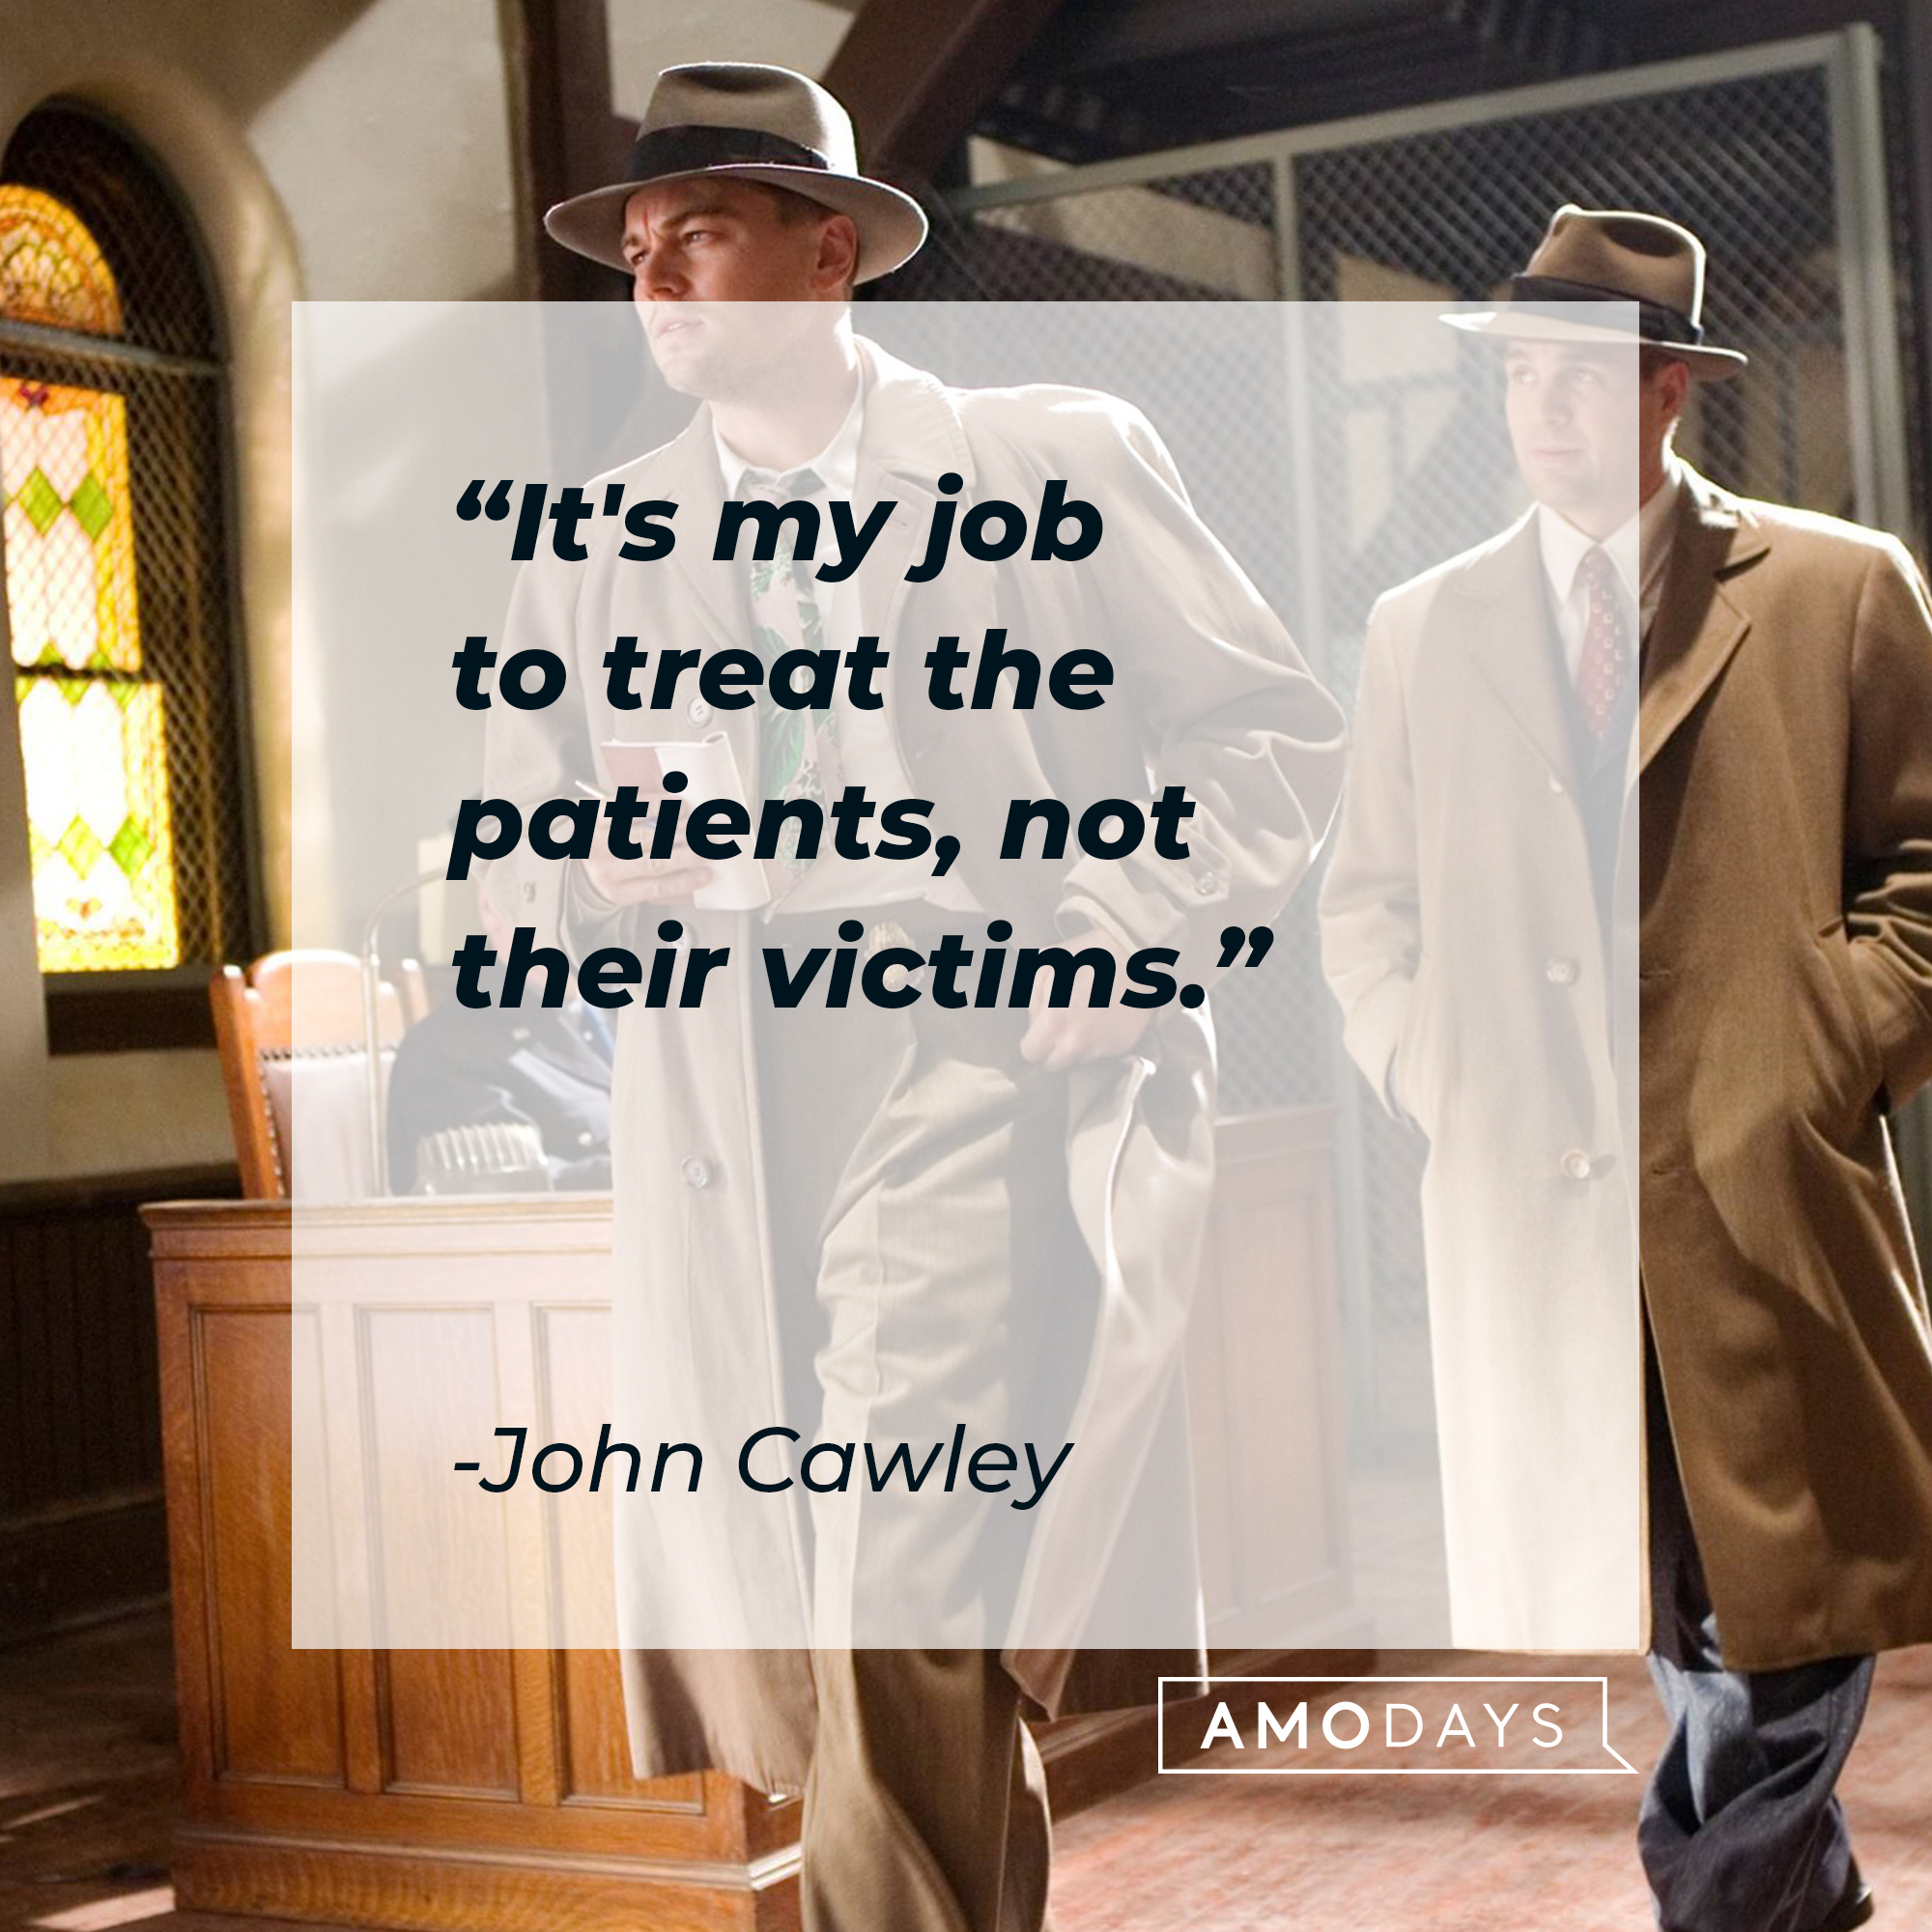 Dr. John Cawley's quote: "It's my job to treat the patients, not their victims." | Source: facebook.com/ShutterIsland